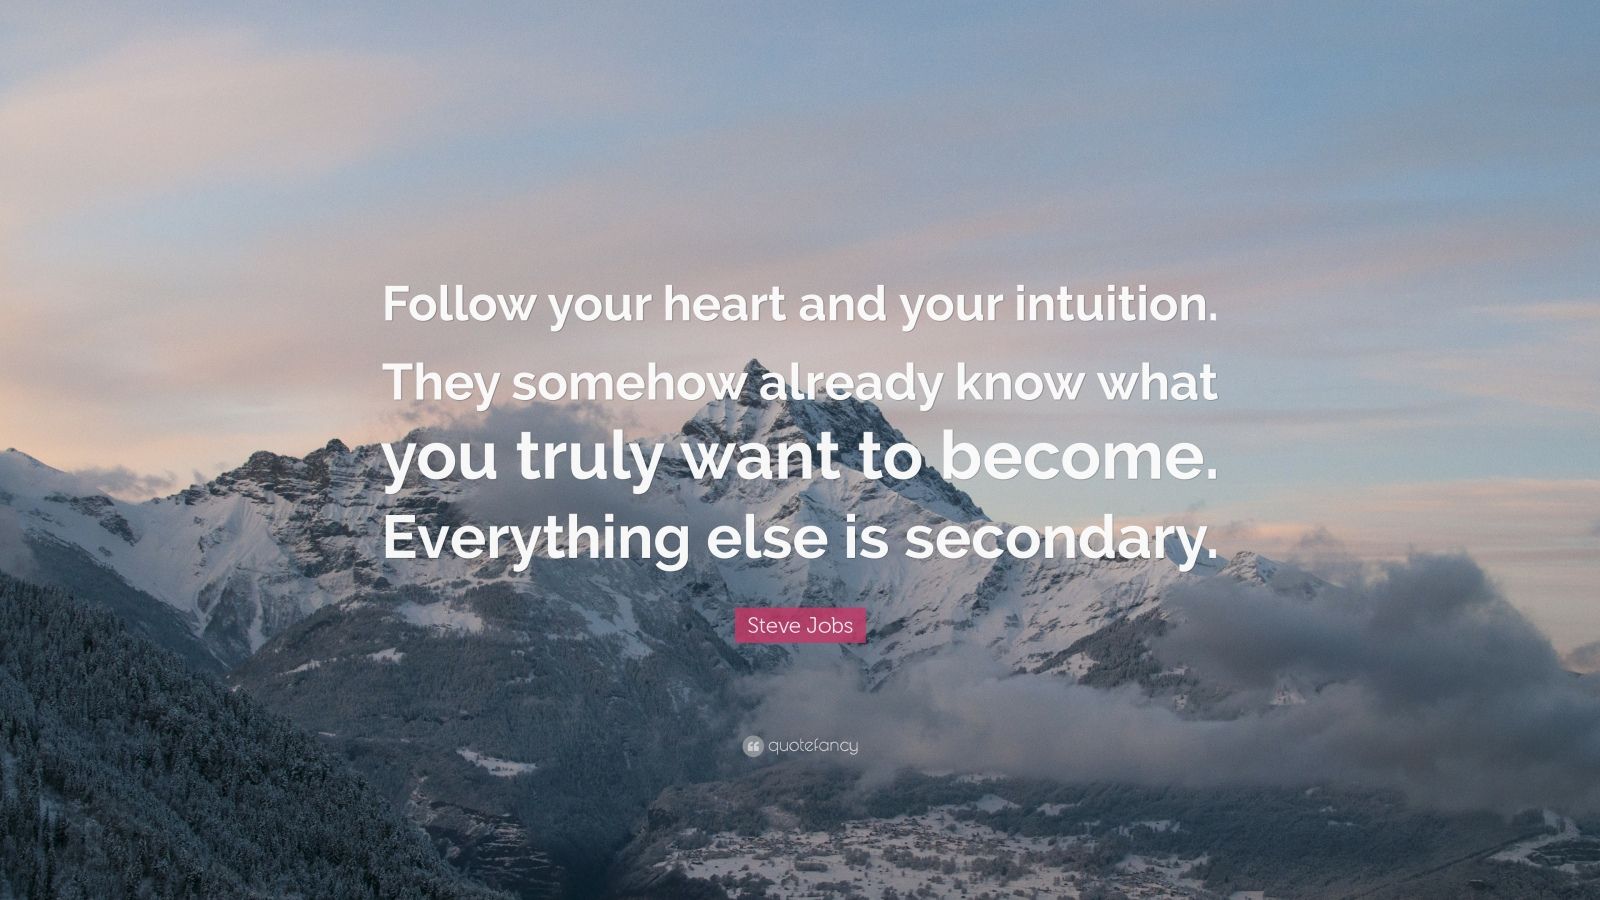 24134 Steve Jobs Quote Follow your heart and your intuition They somehow